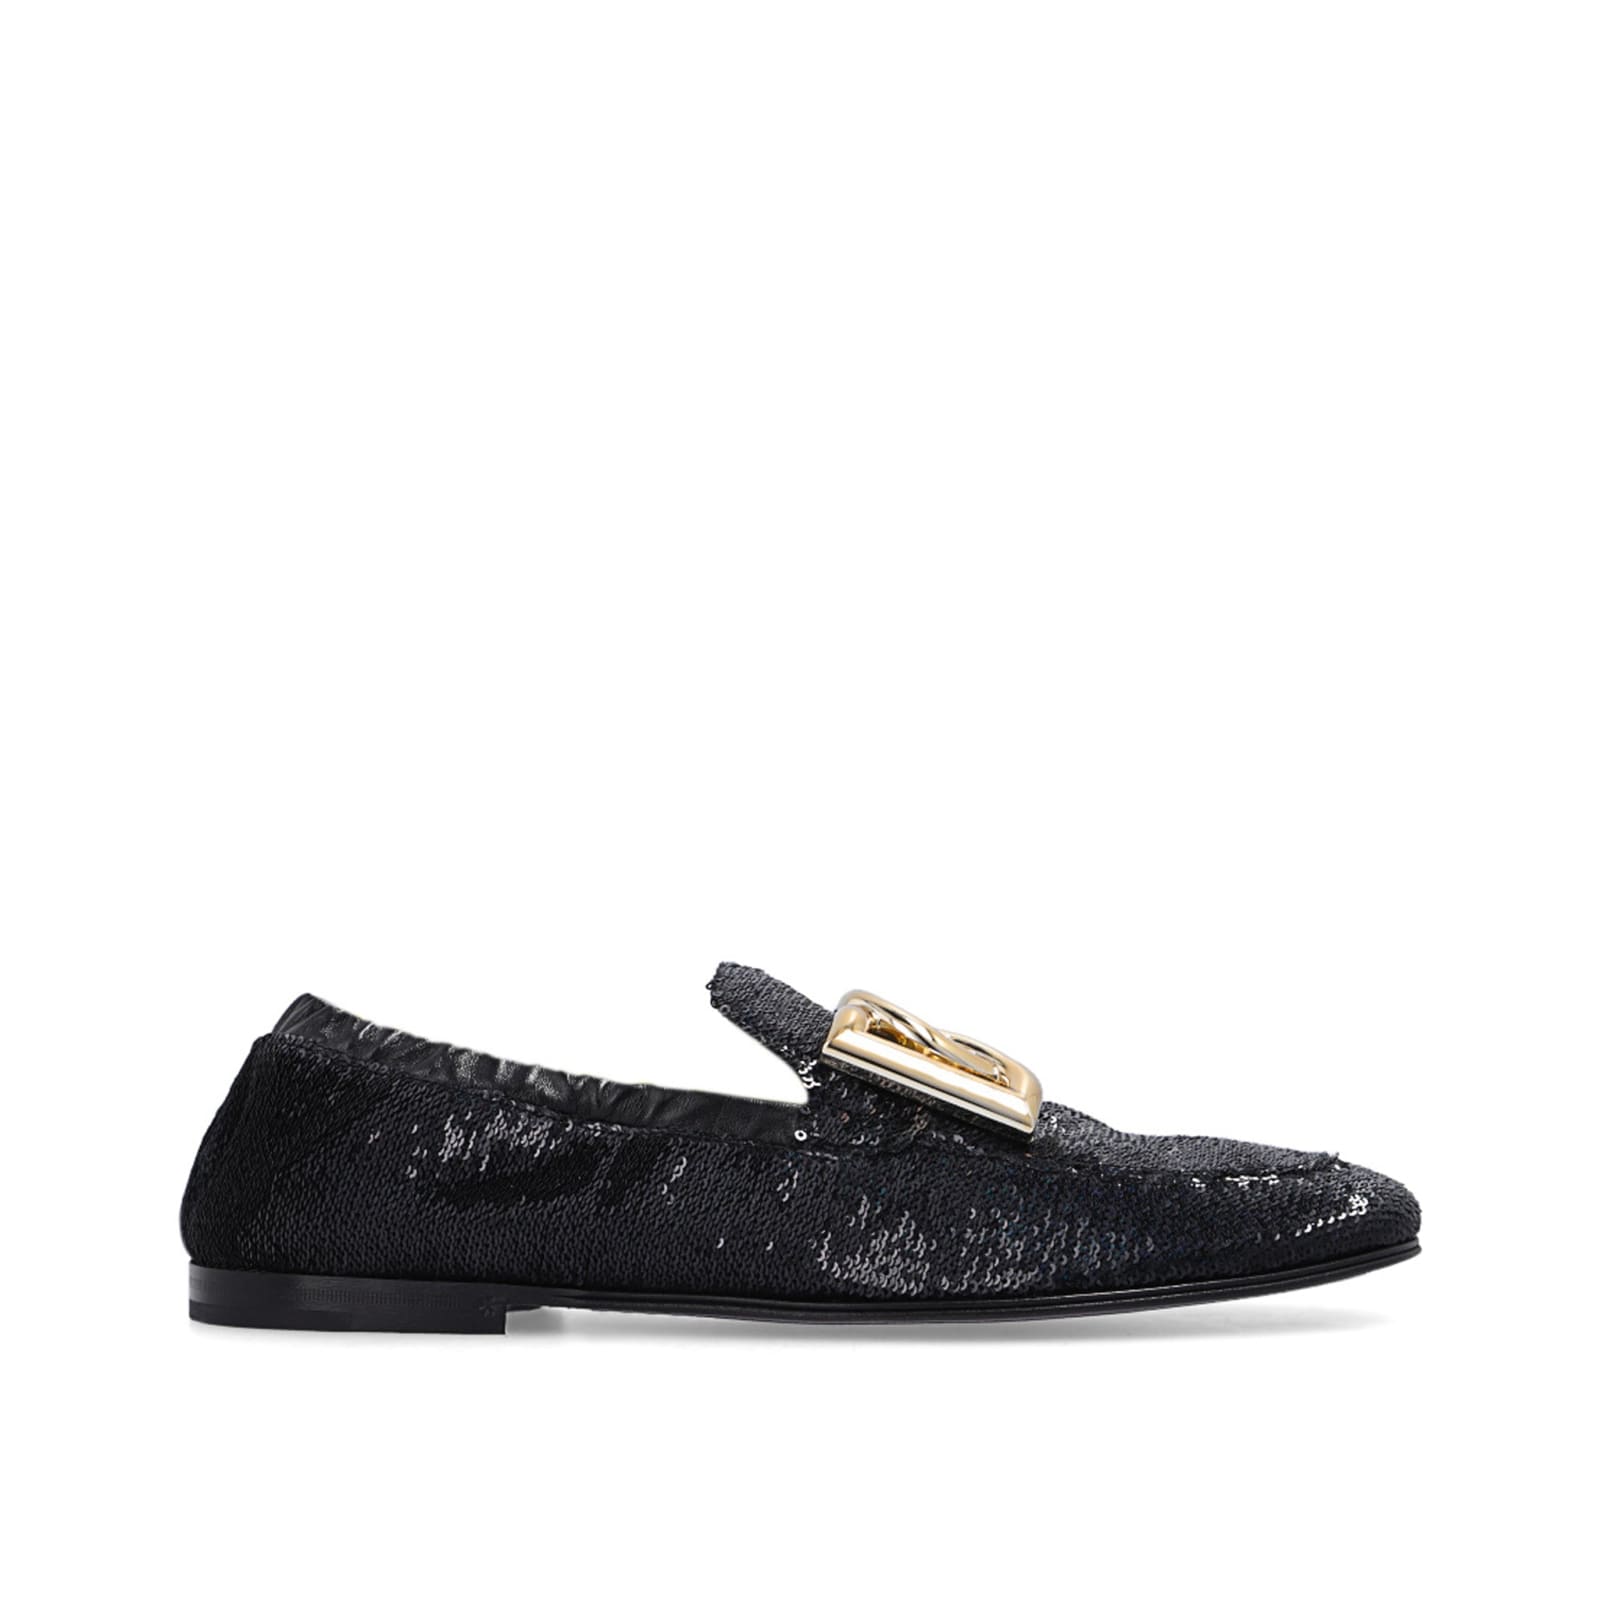 DOLCE & GABBANA ARIOSTO PAILLETTES LOAFERS